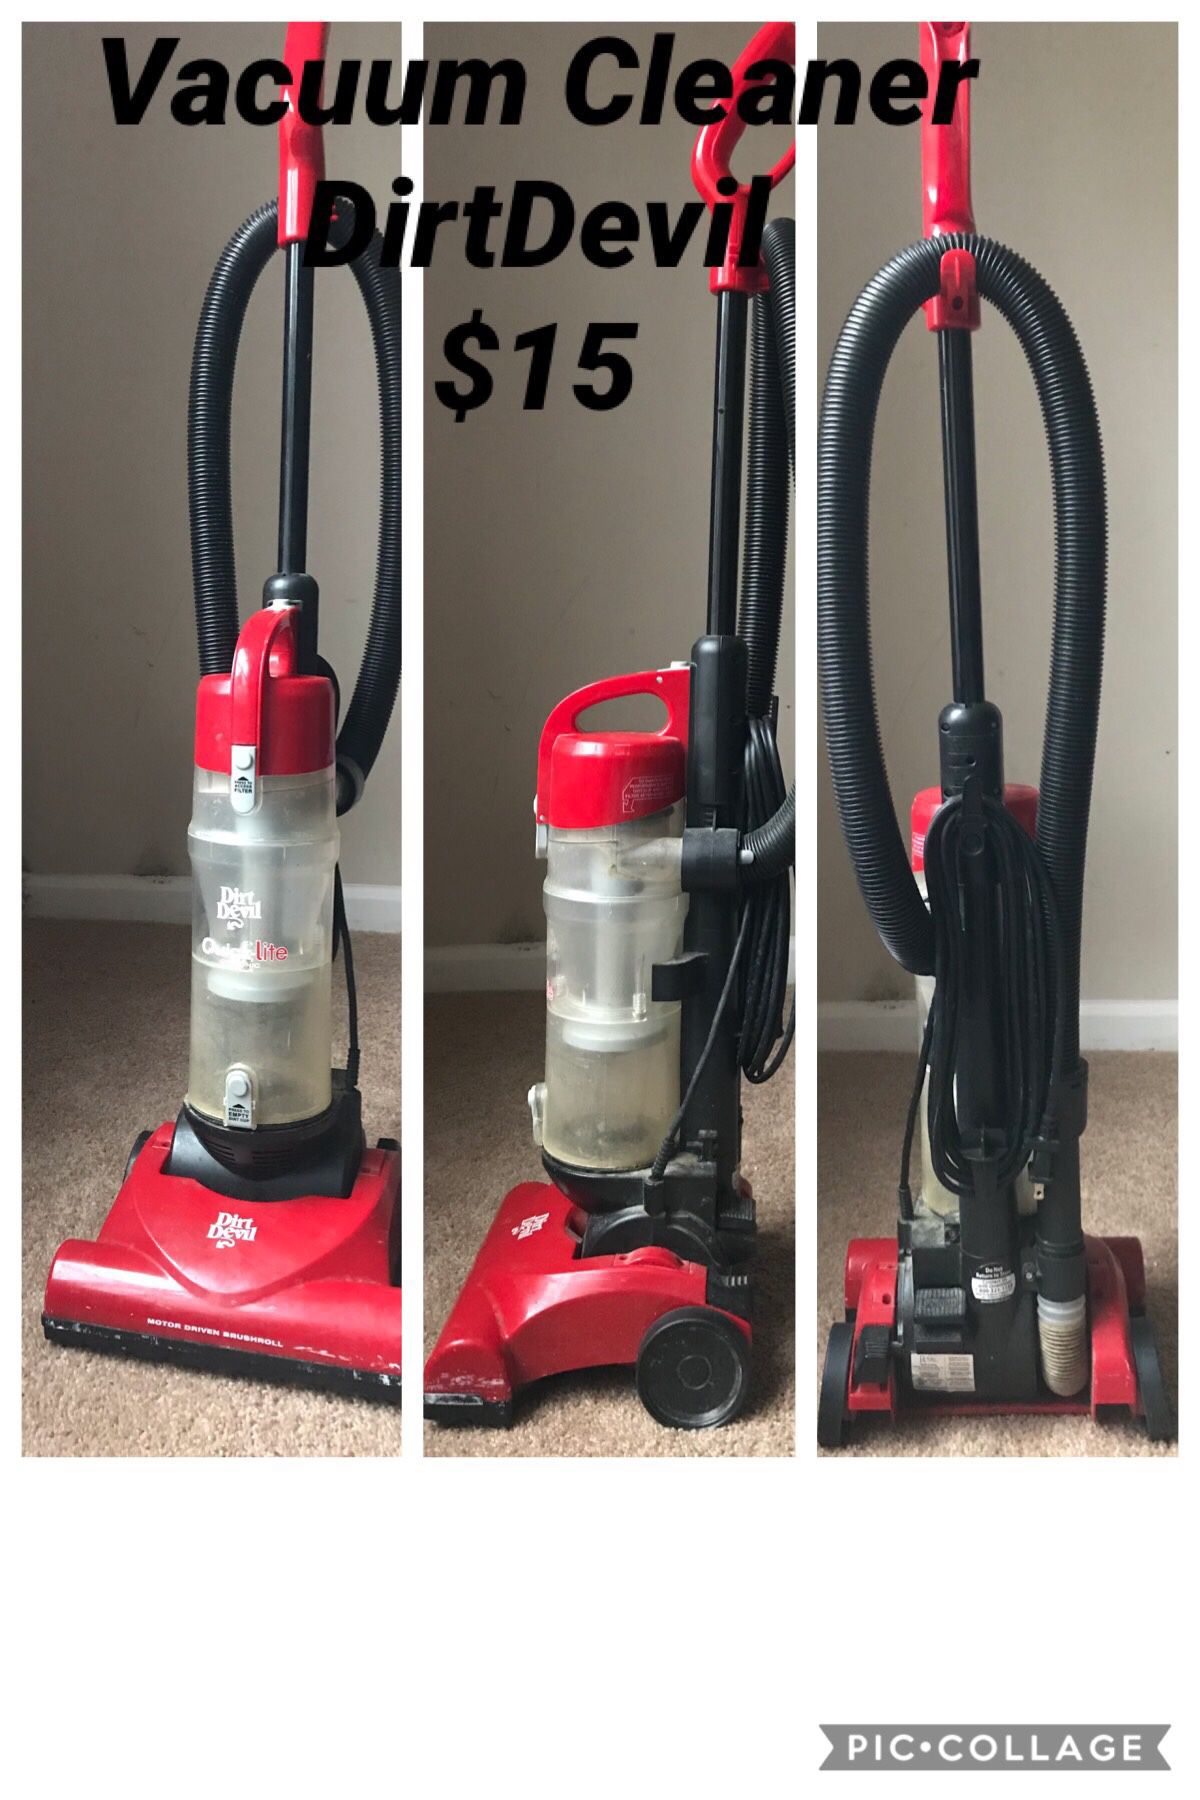 Black & Decker Power Series EXTREME Cordless Stick Vacuum, Gently Used for  Sale in Charlotte, NC - OfferUp